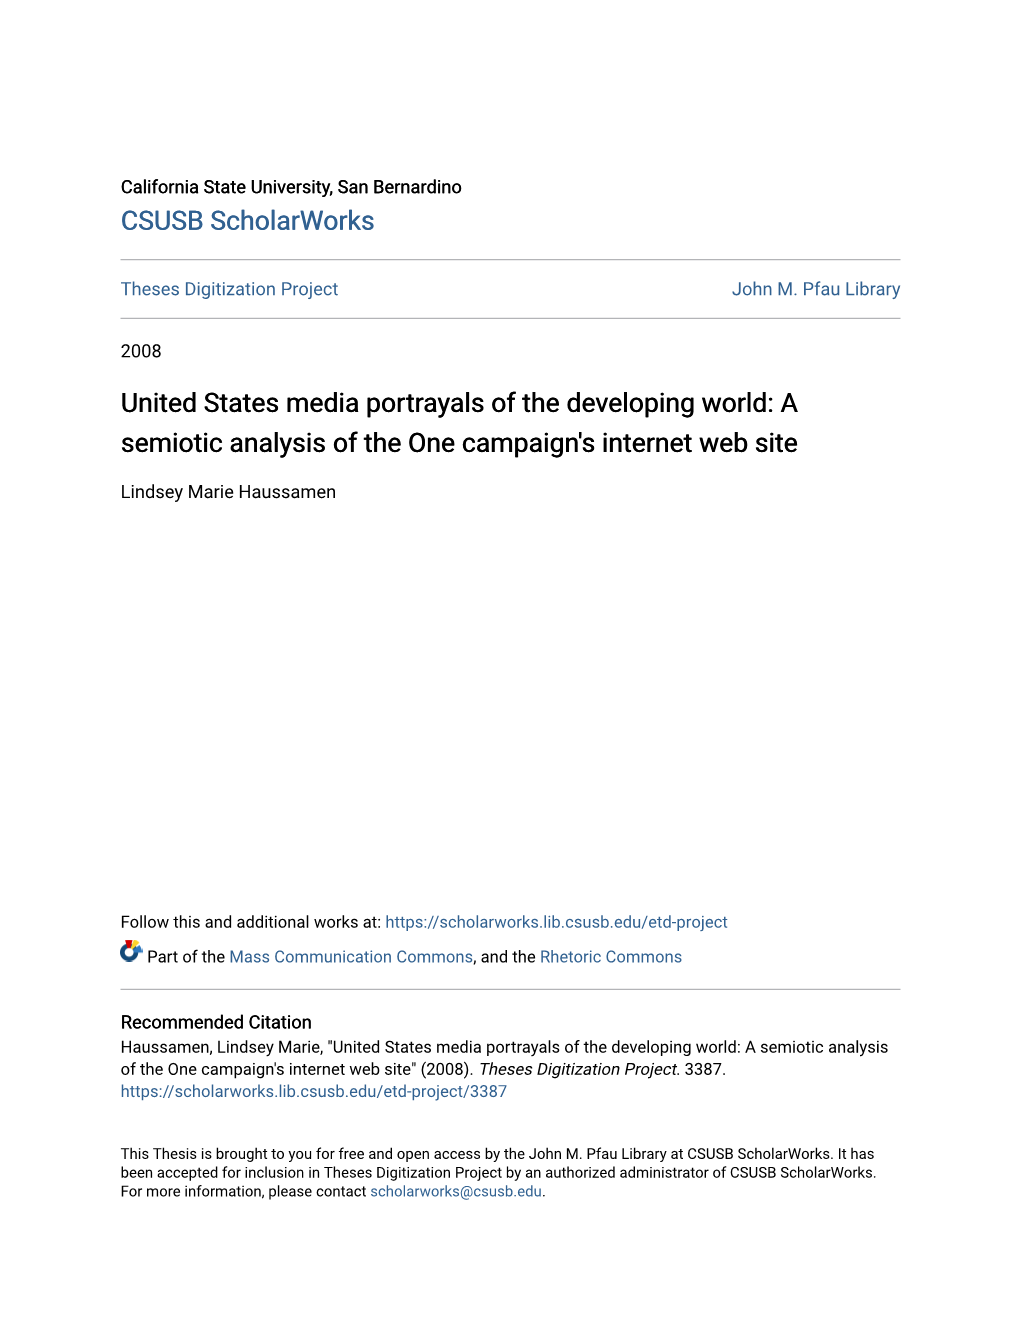 United States Media Portrayals of the Developing World: a Semiotic Analysis of the One Campaign's Internet Web Site